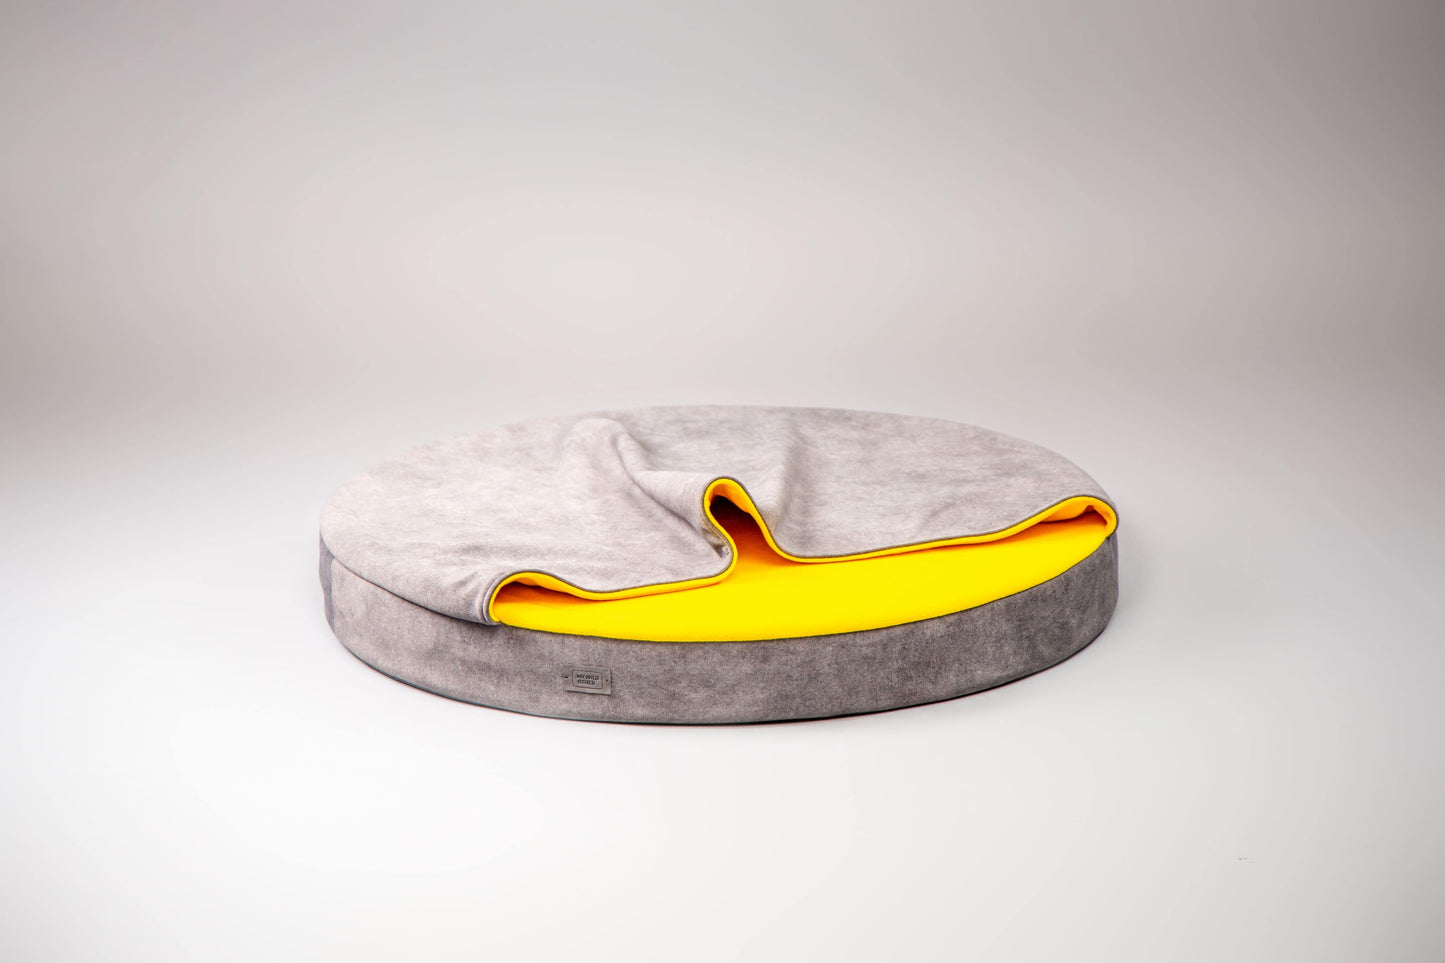 Cozy cave dog bed. STEEL GREY+YELLOW - European handmade dog accessories by My Wild Other